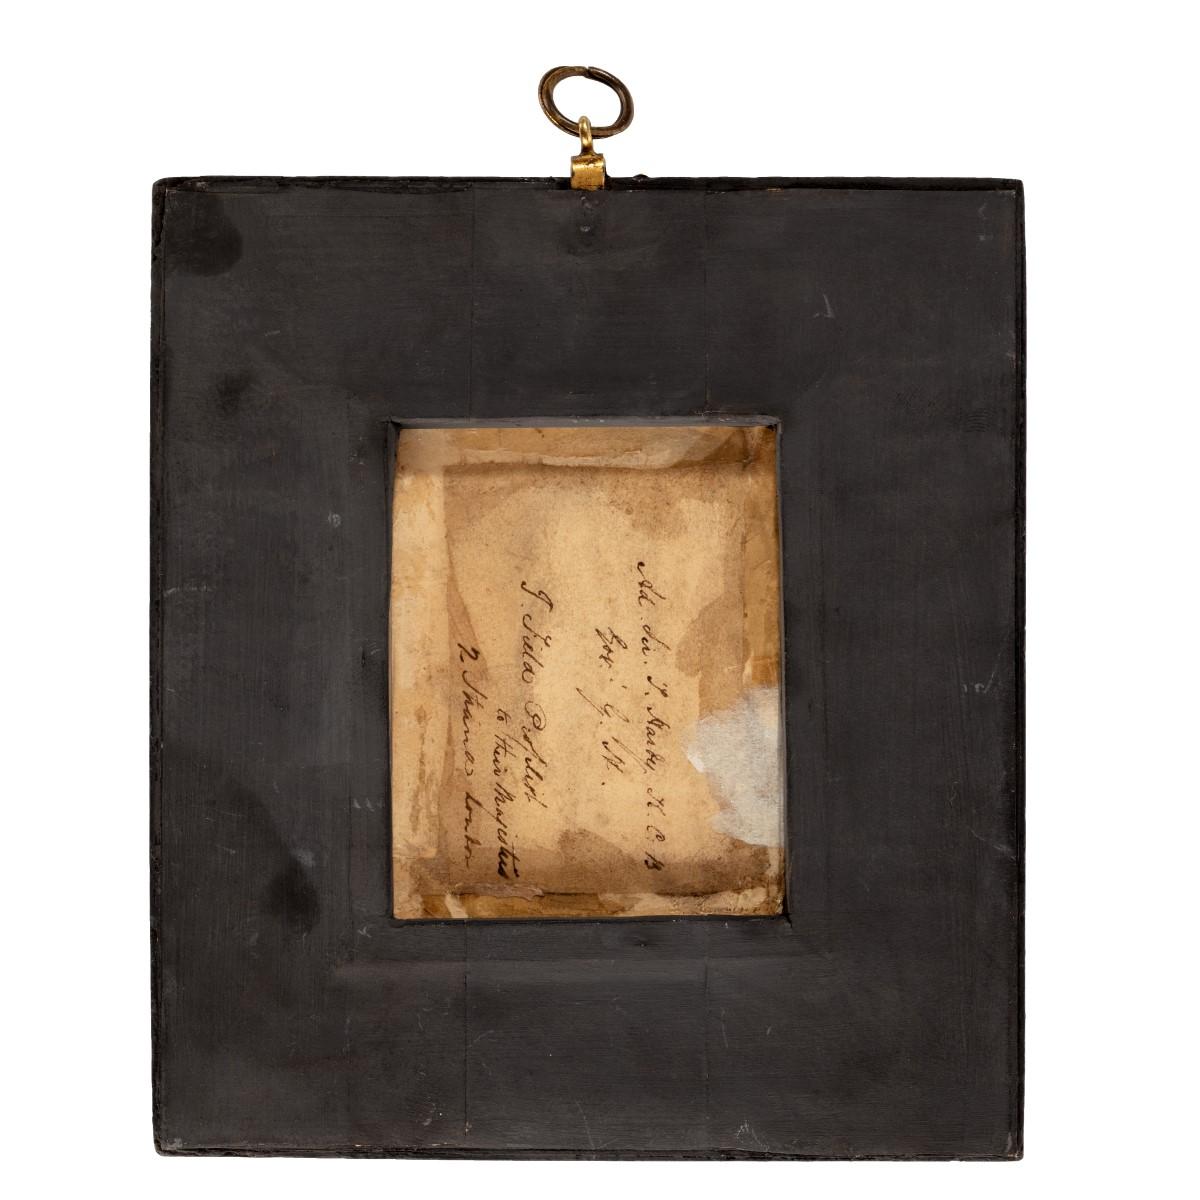 This Silhouette shows Admiral Sir Thomas Hardy in dress uniform and facing to the left. The reverse is inscribed in cursive handwriting ‘Ad. Sir T Hardy K.C.B. Gov. G H. J Field Profilist to their Majesties, 2 Strand, London.’ 

English, circa